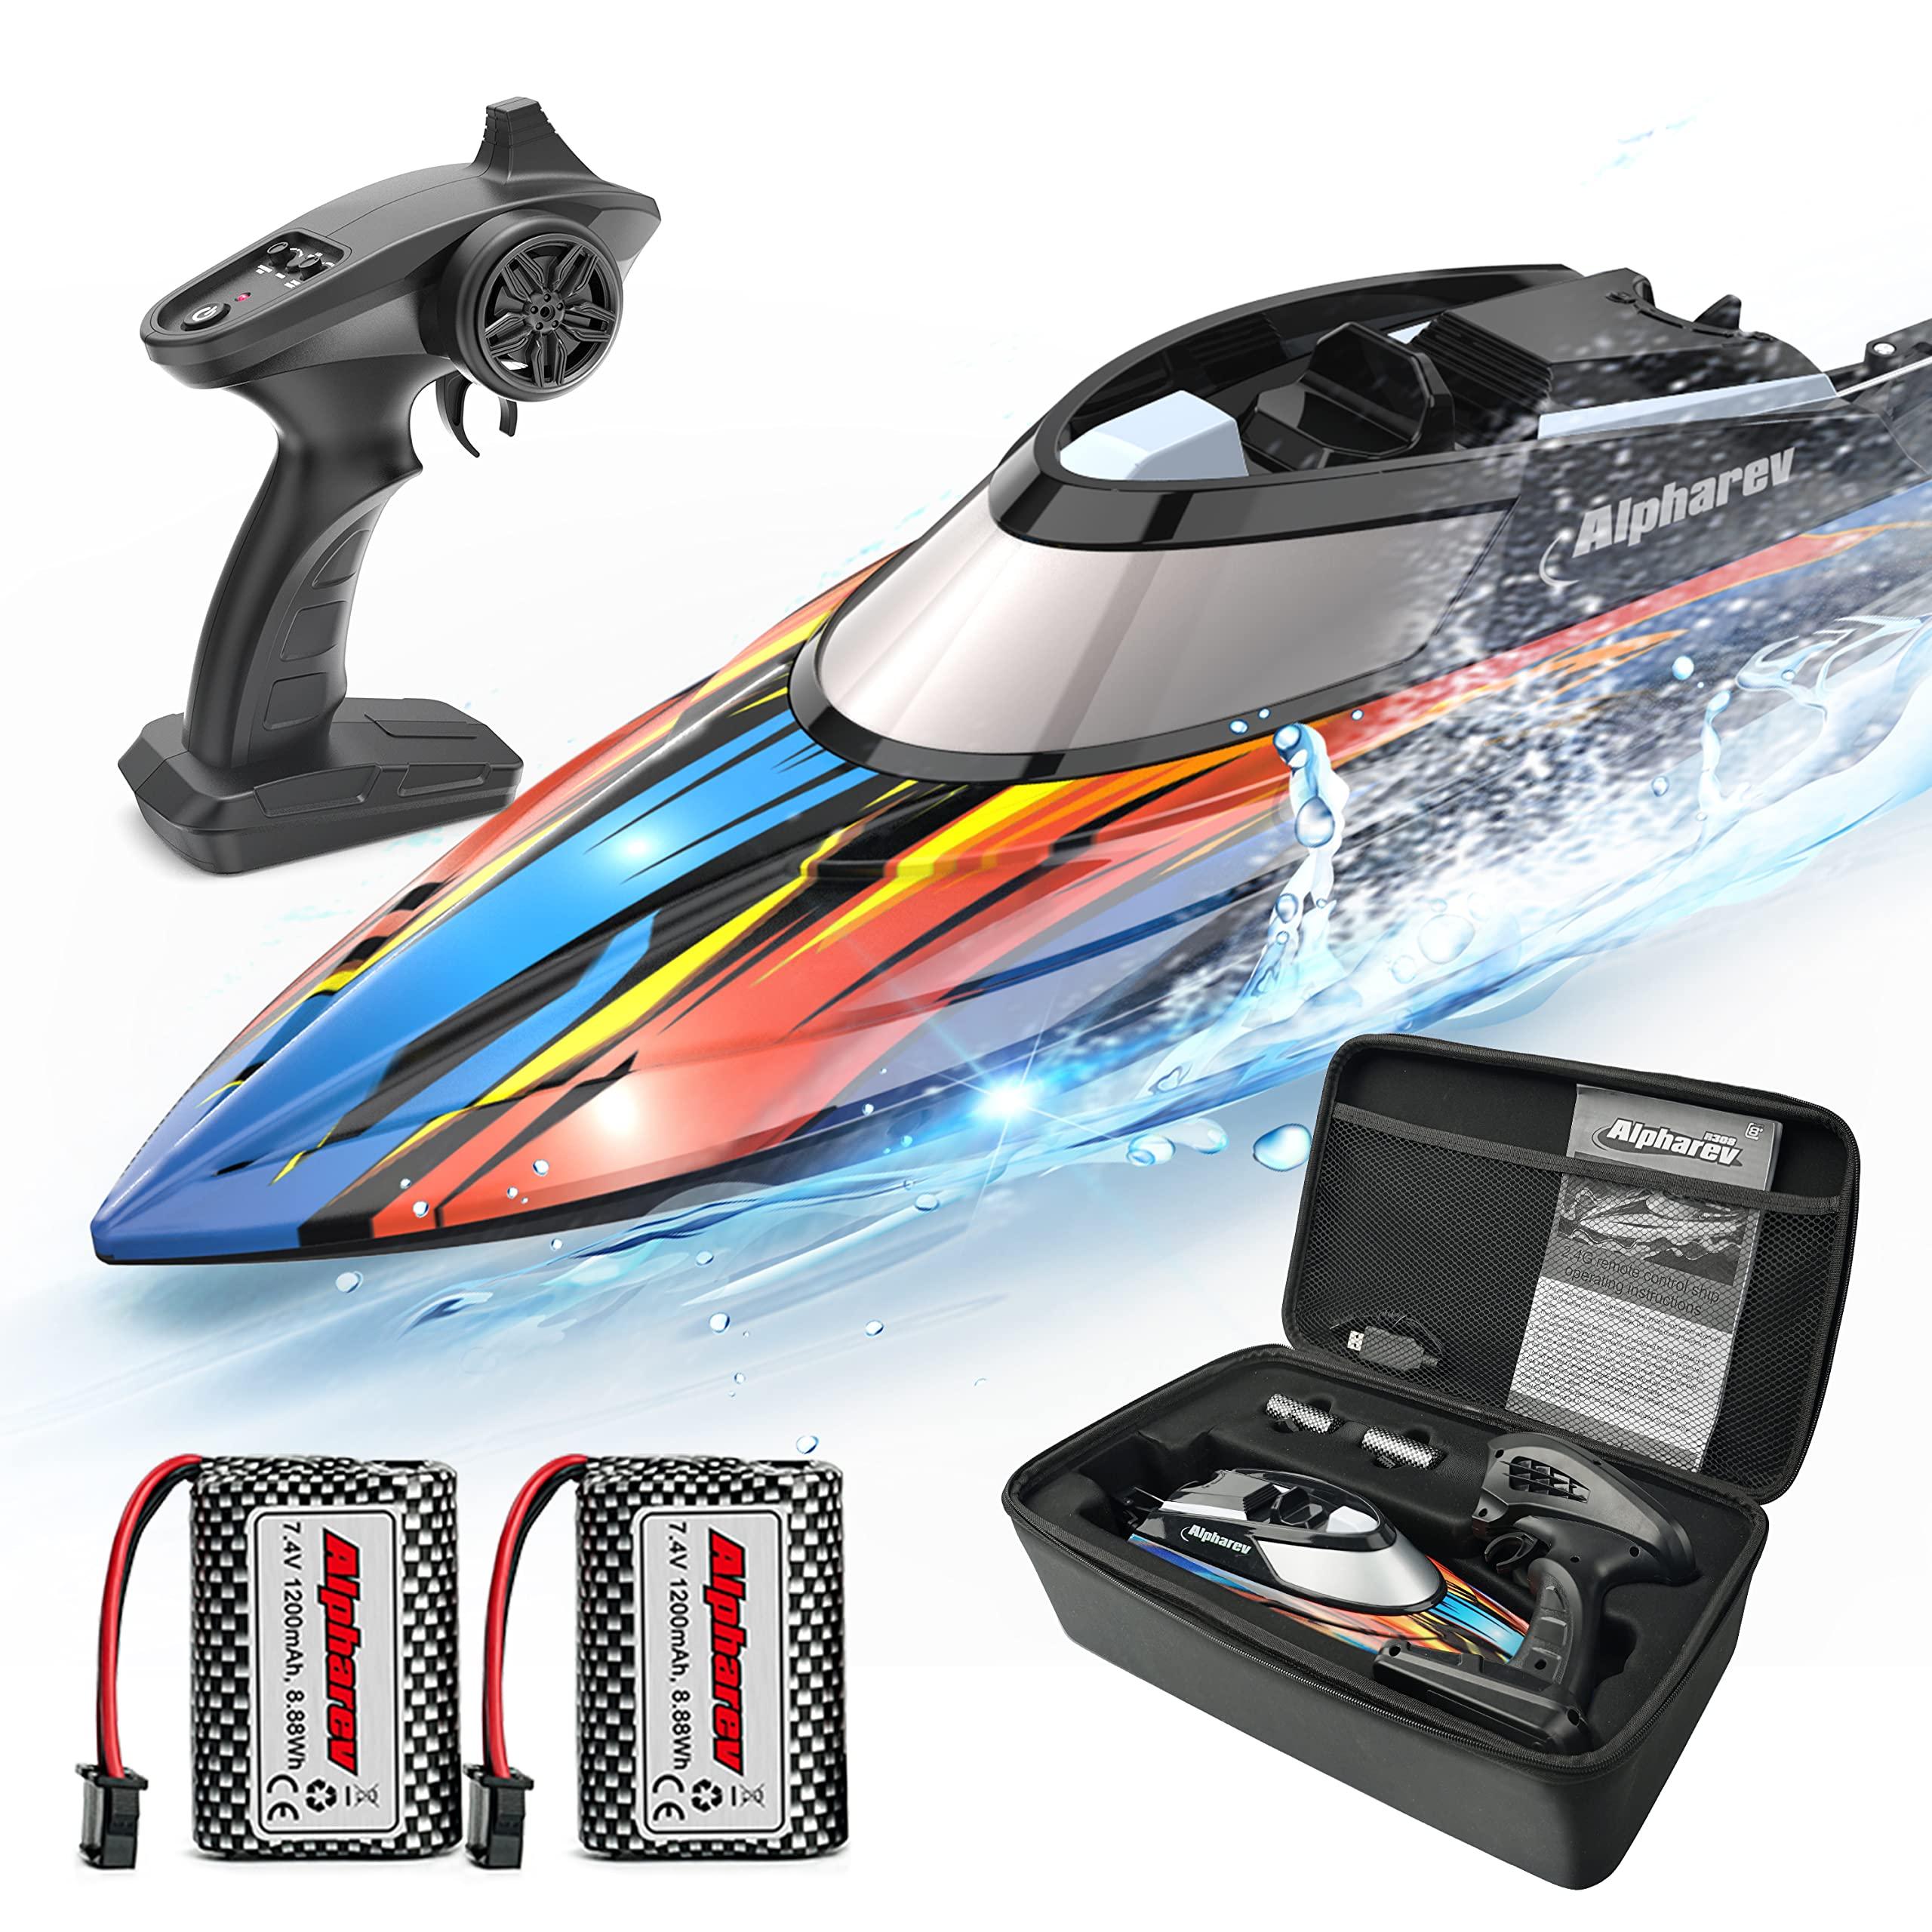 Remote Control Boat For Swimming Pool: Enhance your remote control boat with these accessories for added functionality and style.